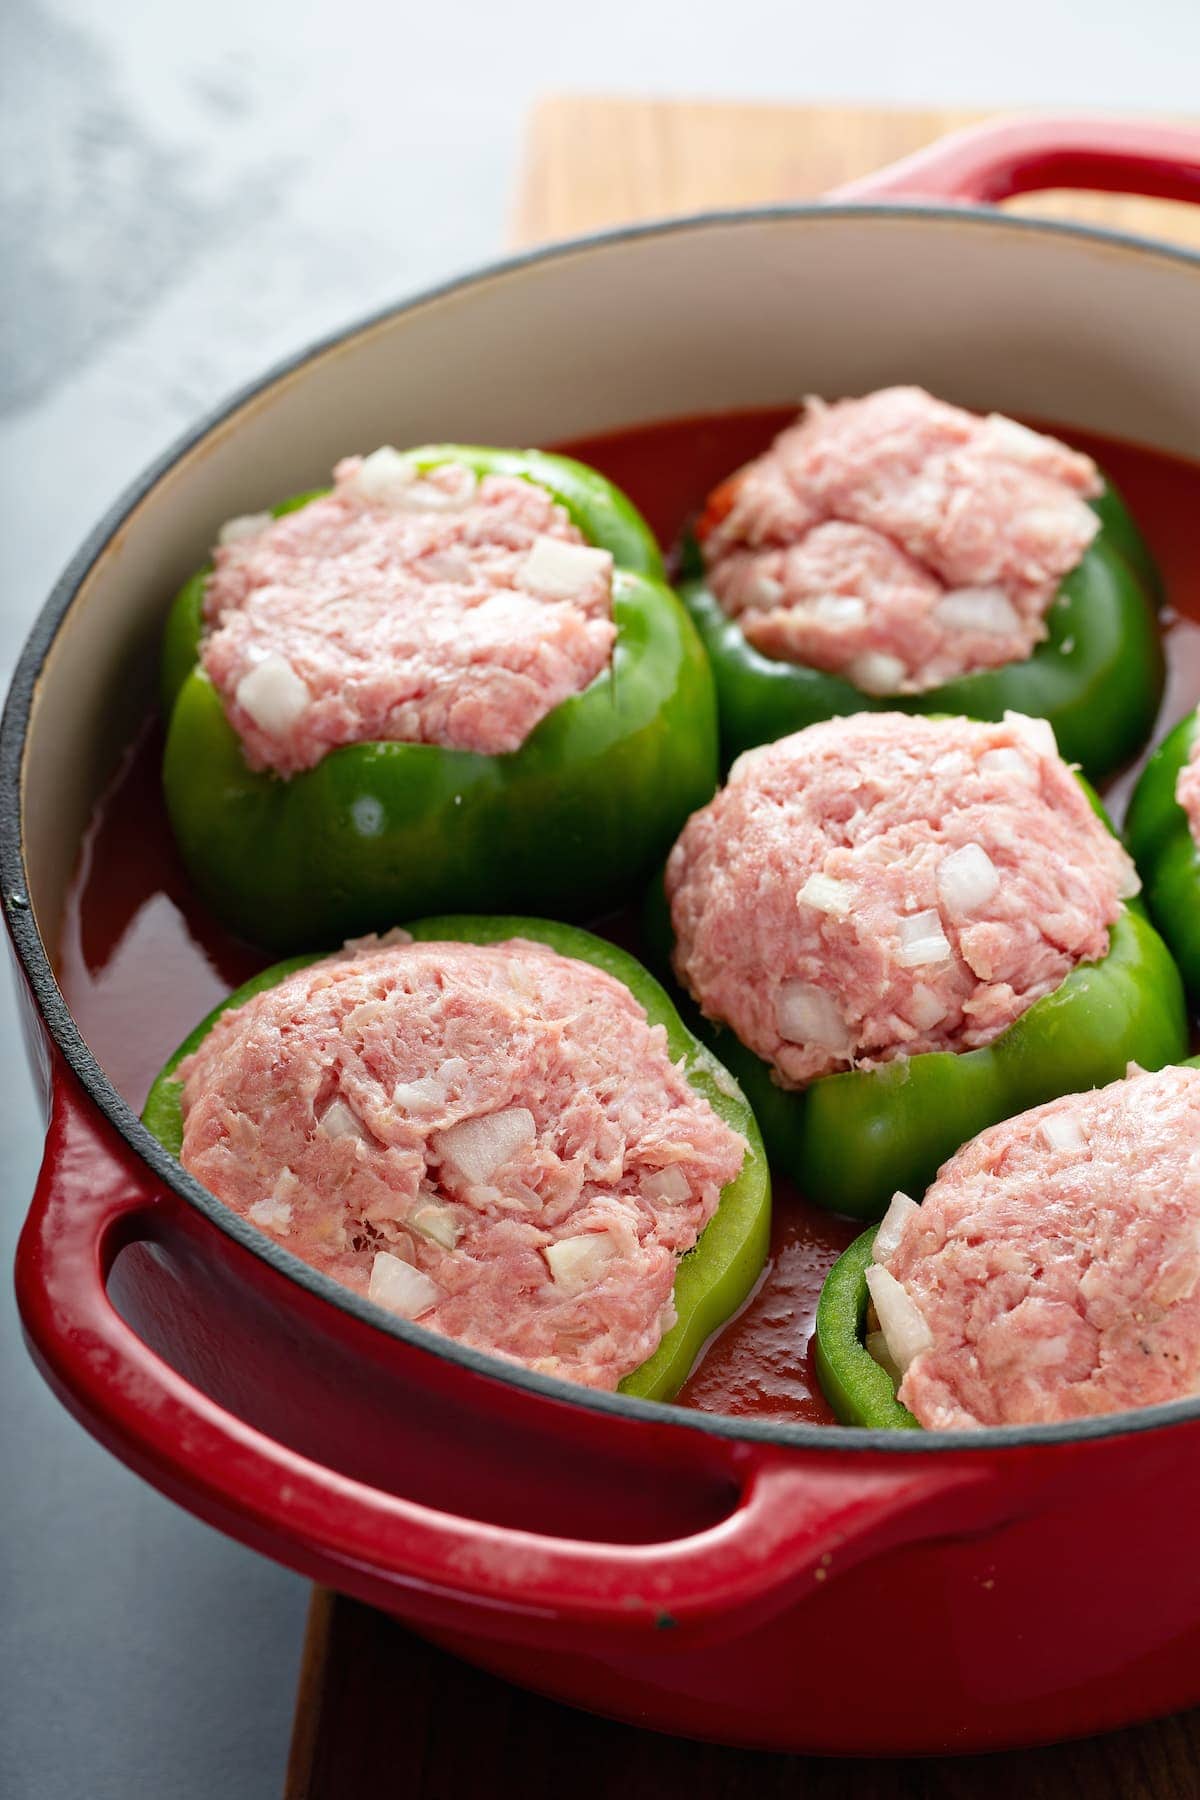 Uncooked stuffed peppers